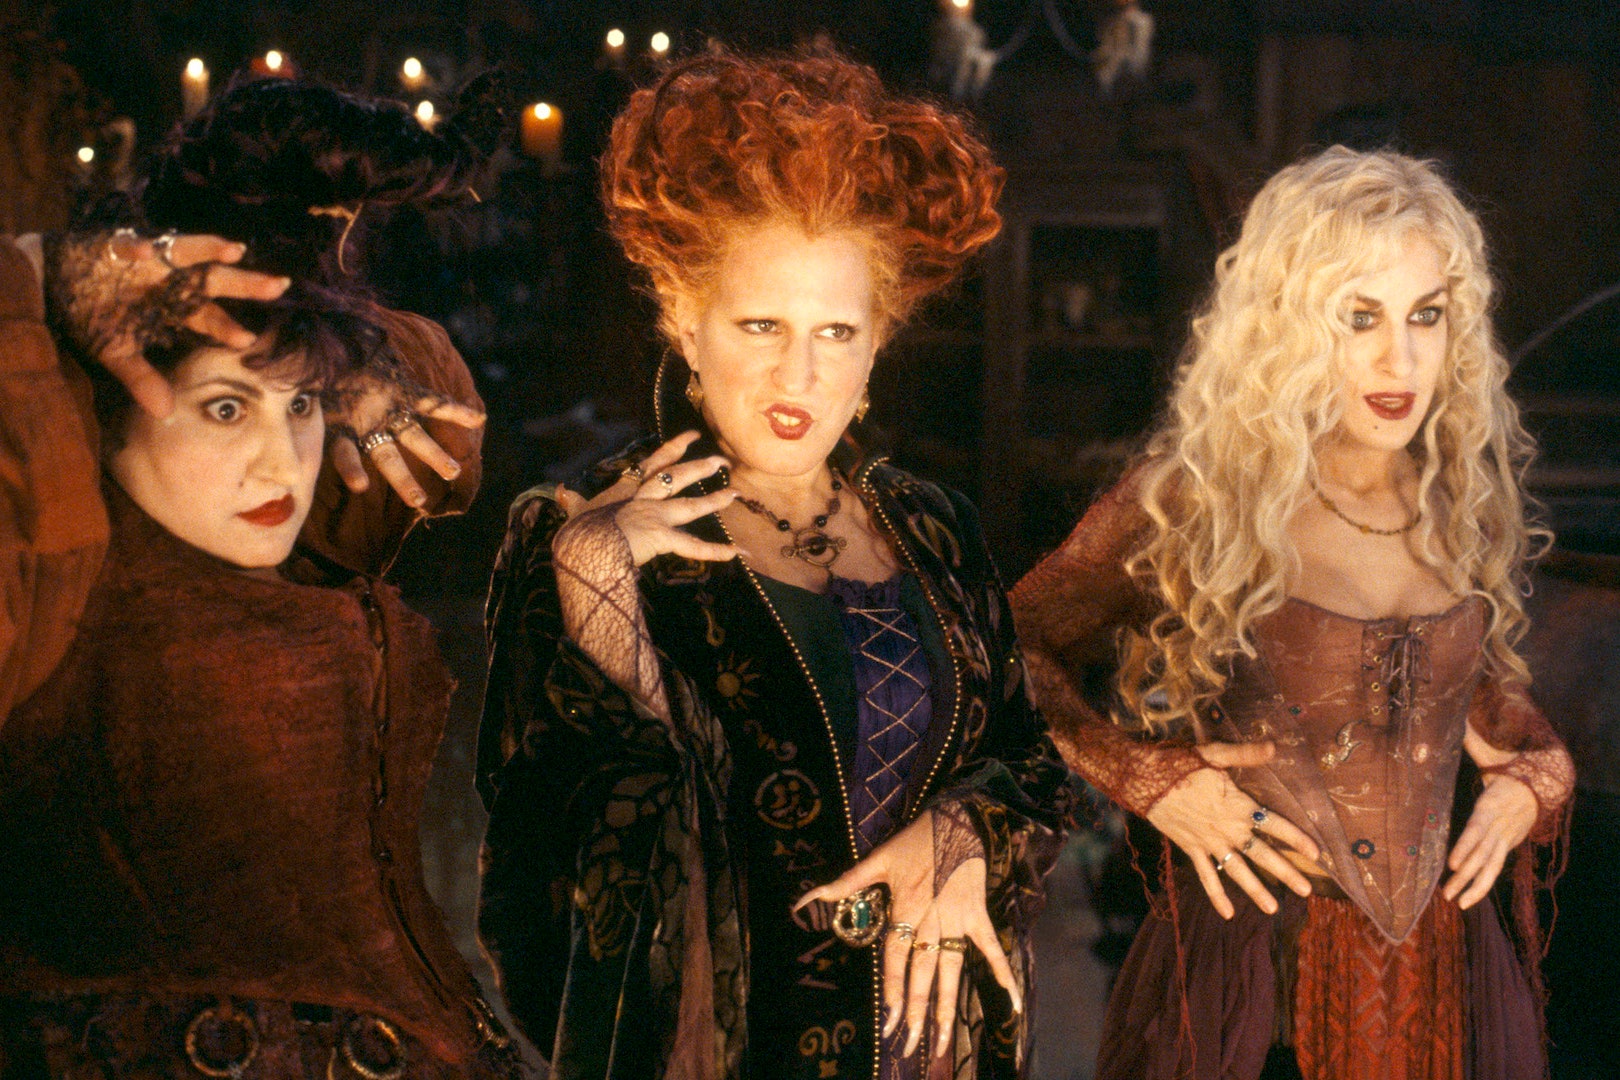 Hocus Pocus Sequel Really, Truly in the Works at Disney+